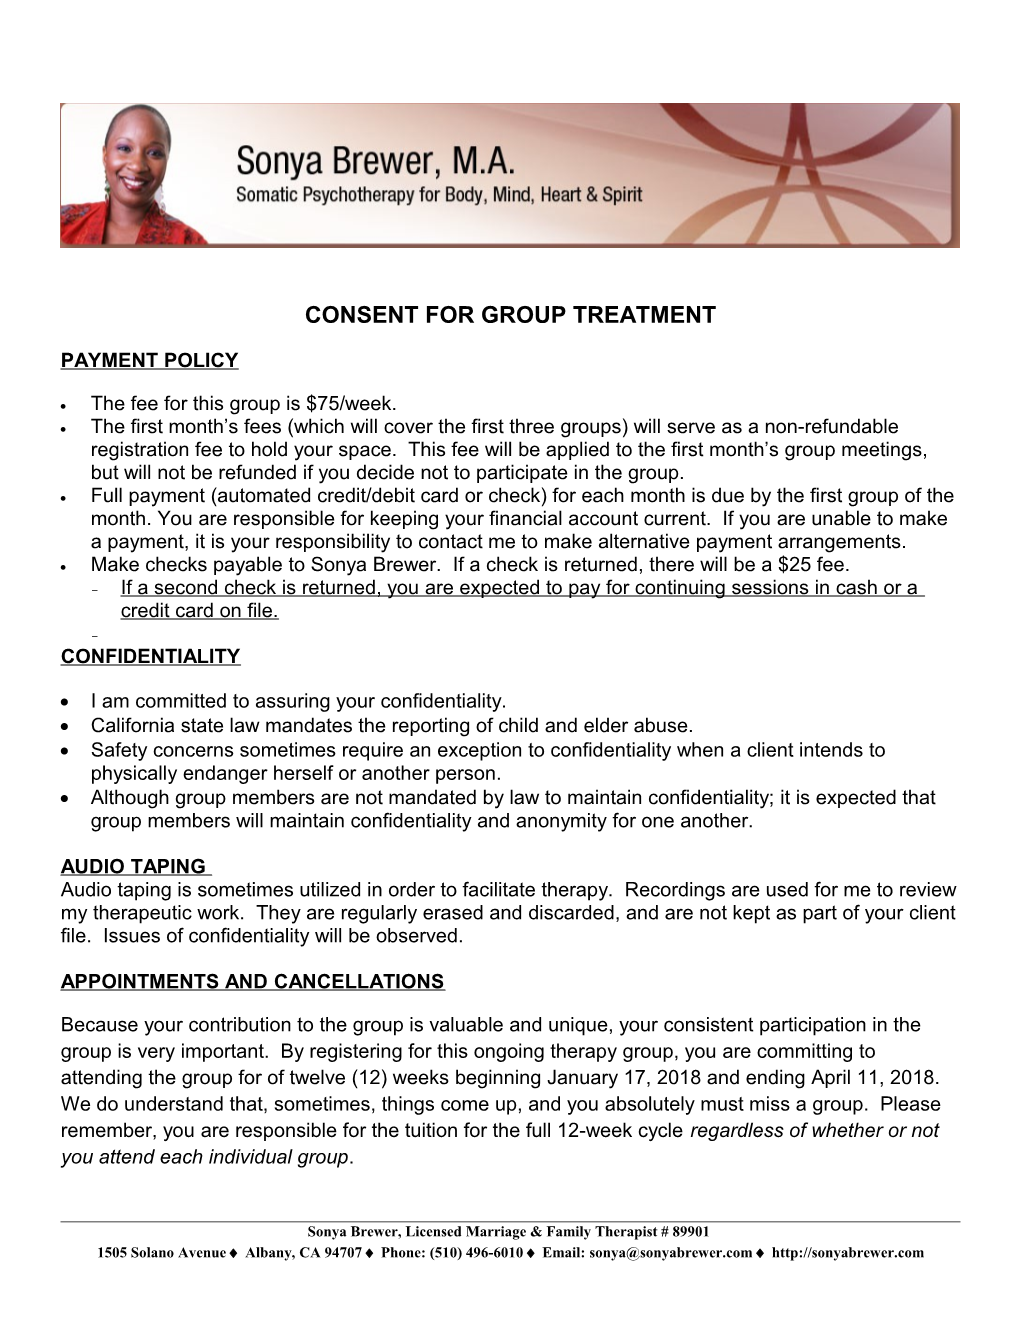 Consent for Group Treatment